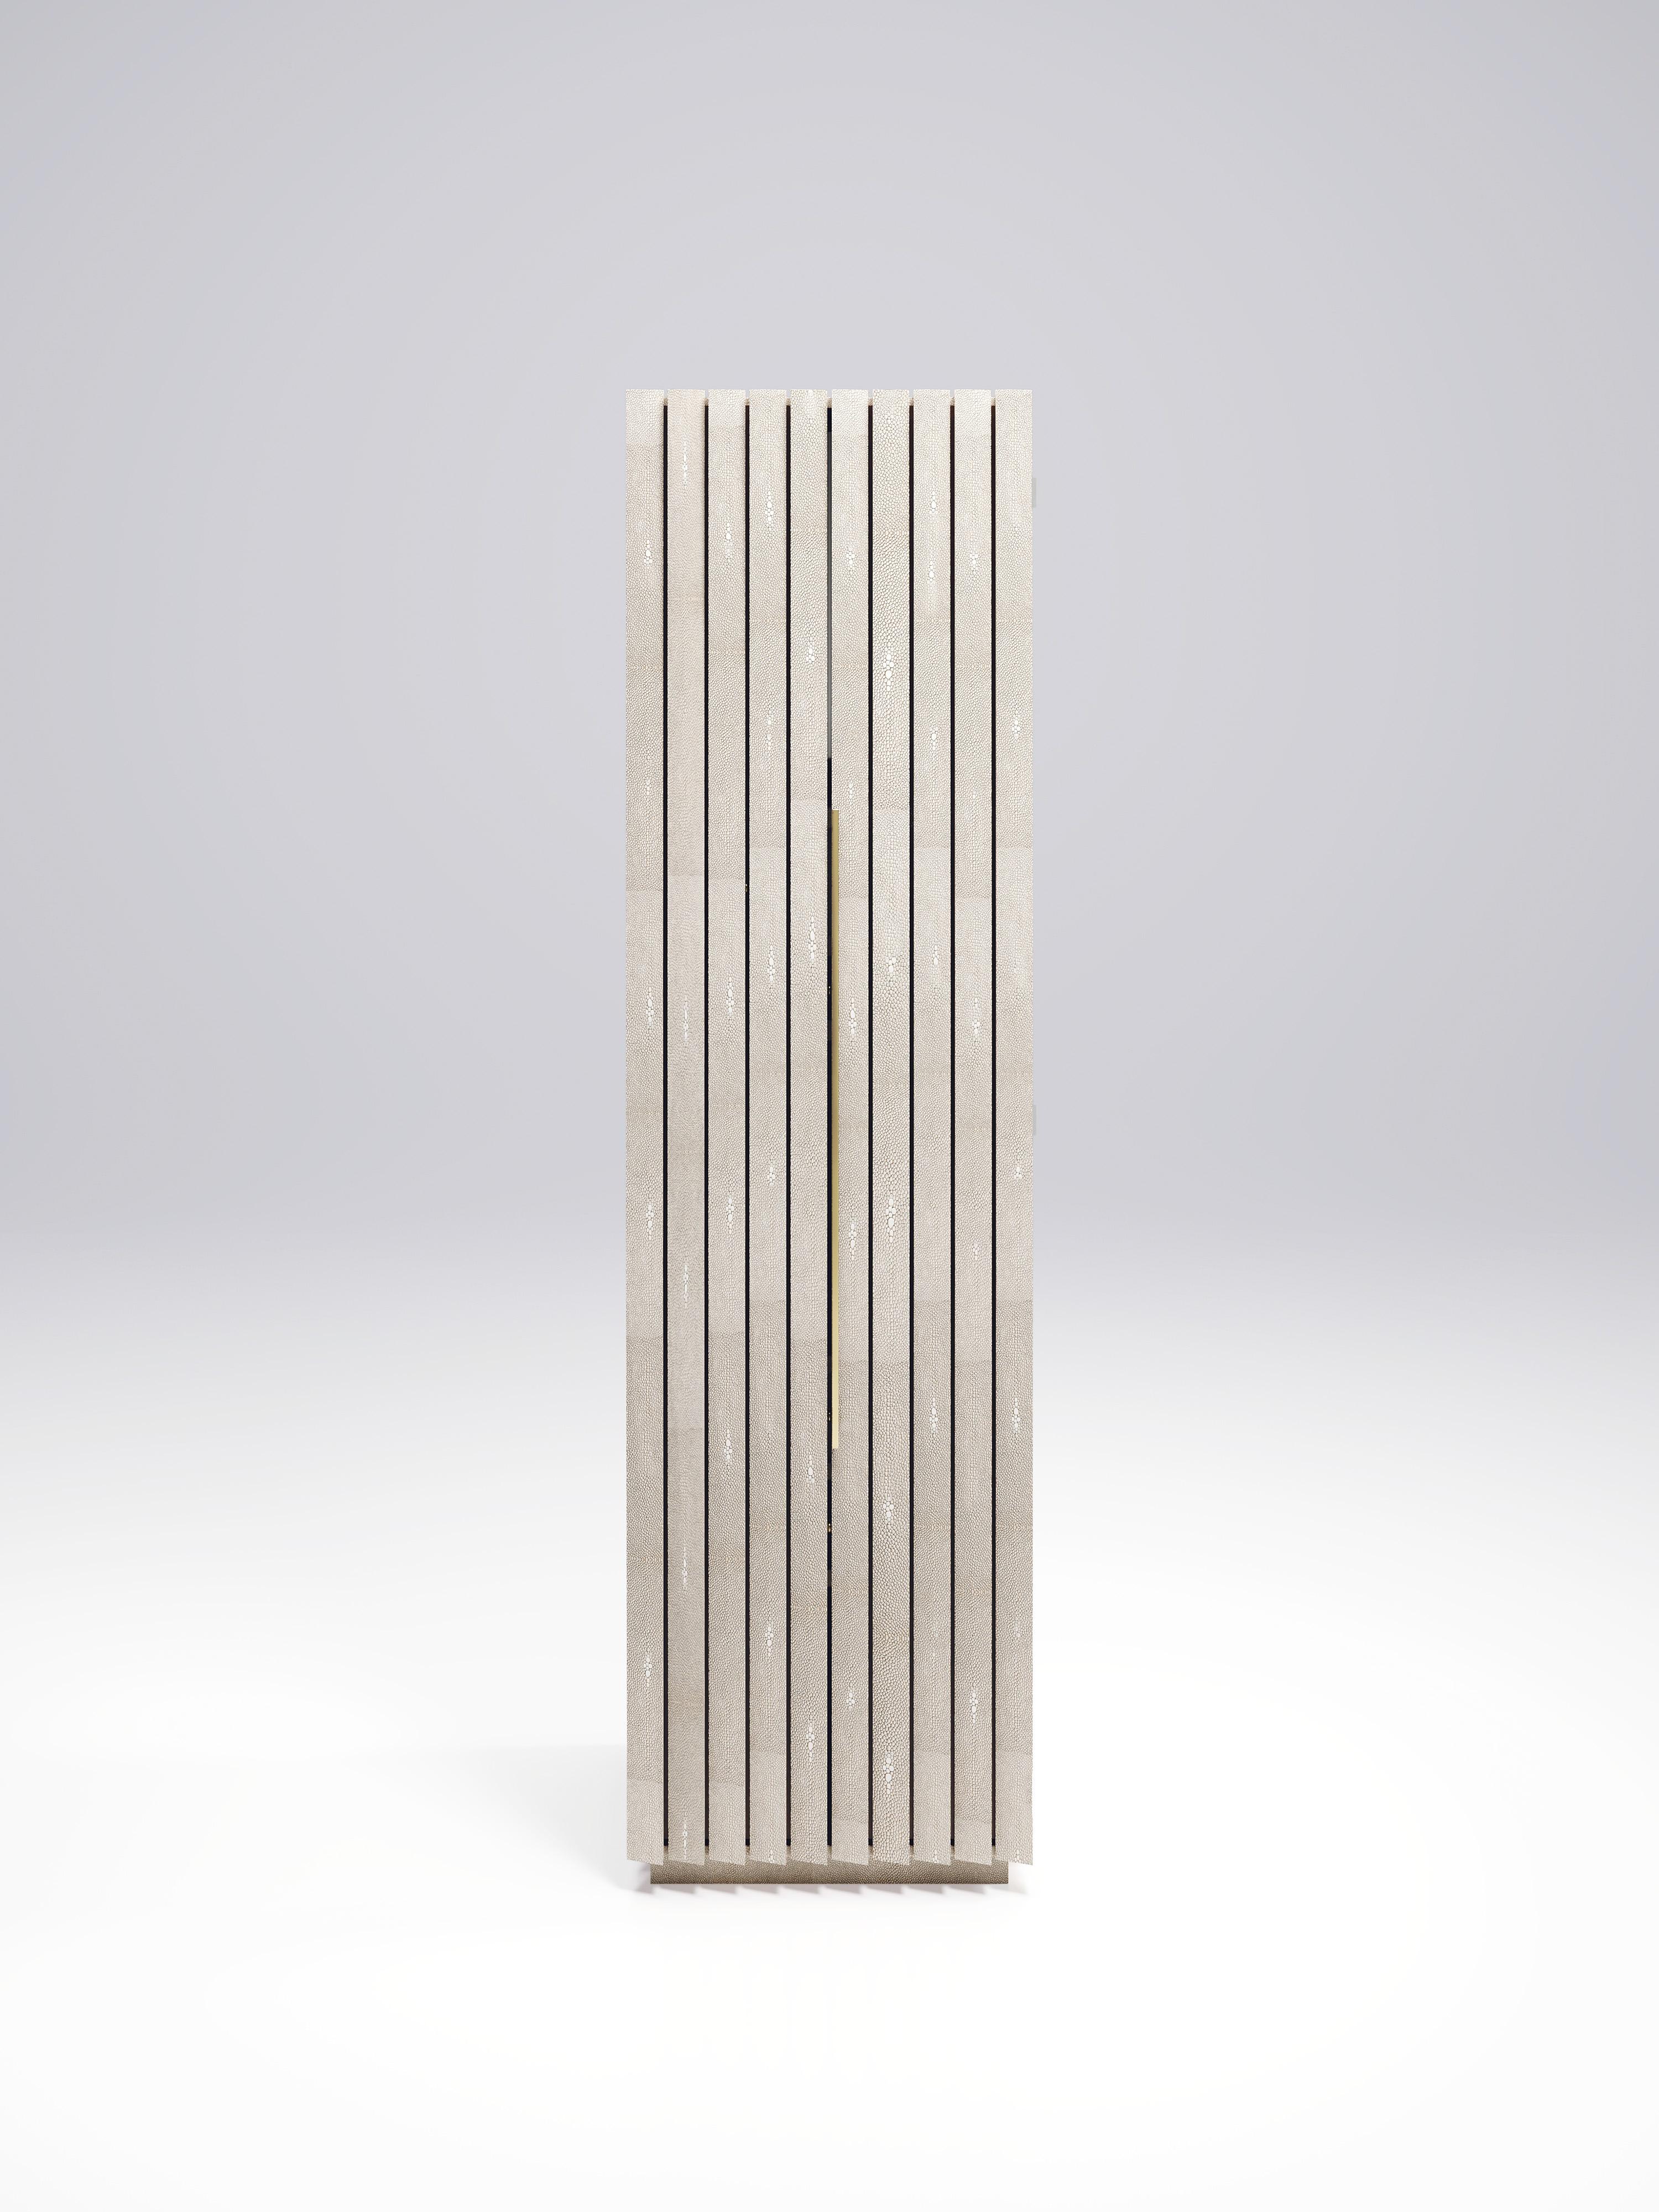 Fluted Shagreen Cabinet by R&Y Augousti For Sale 10